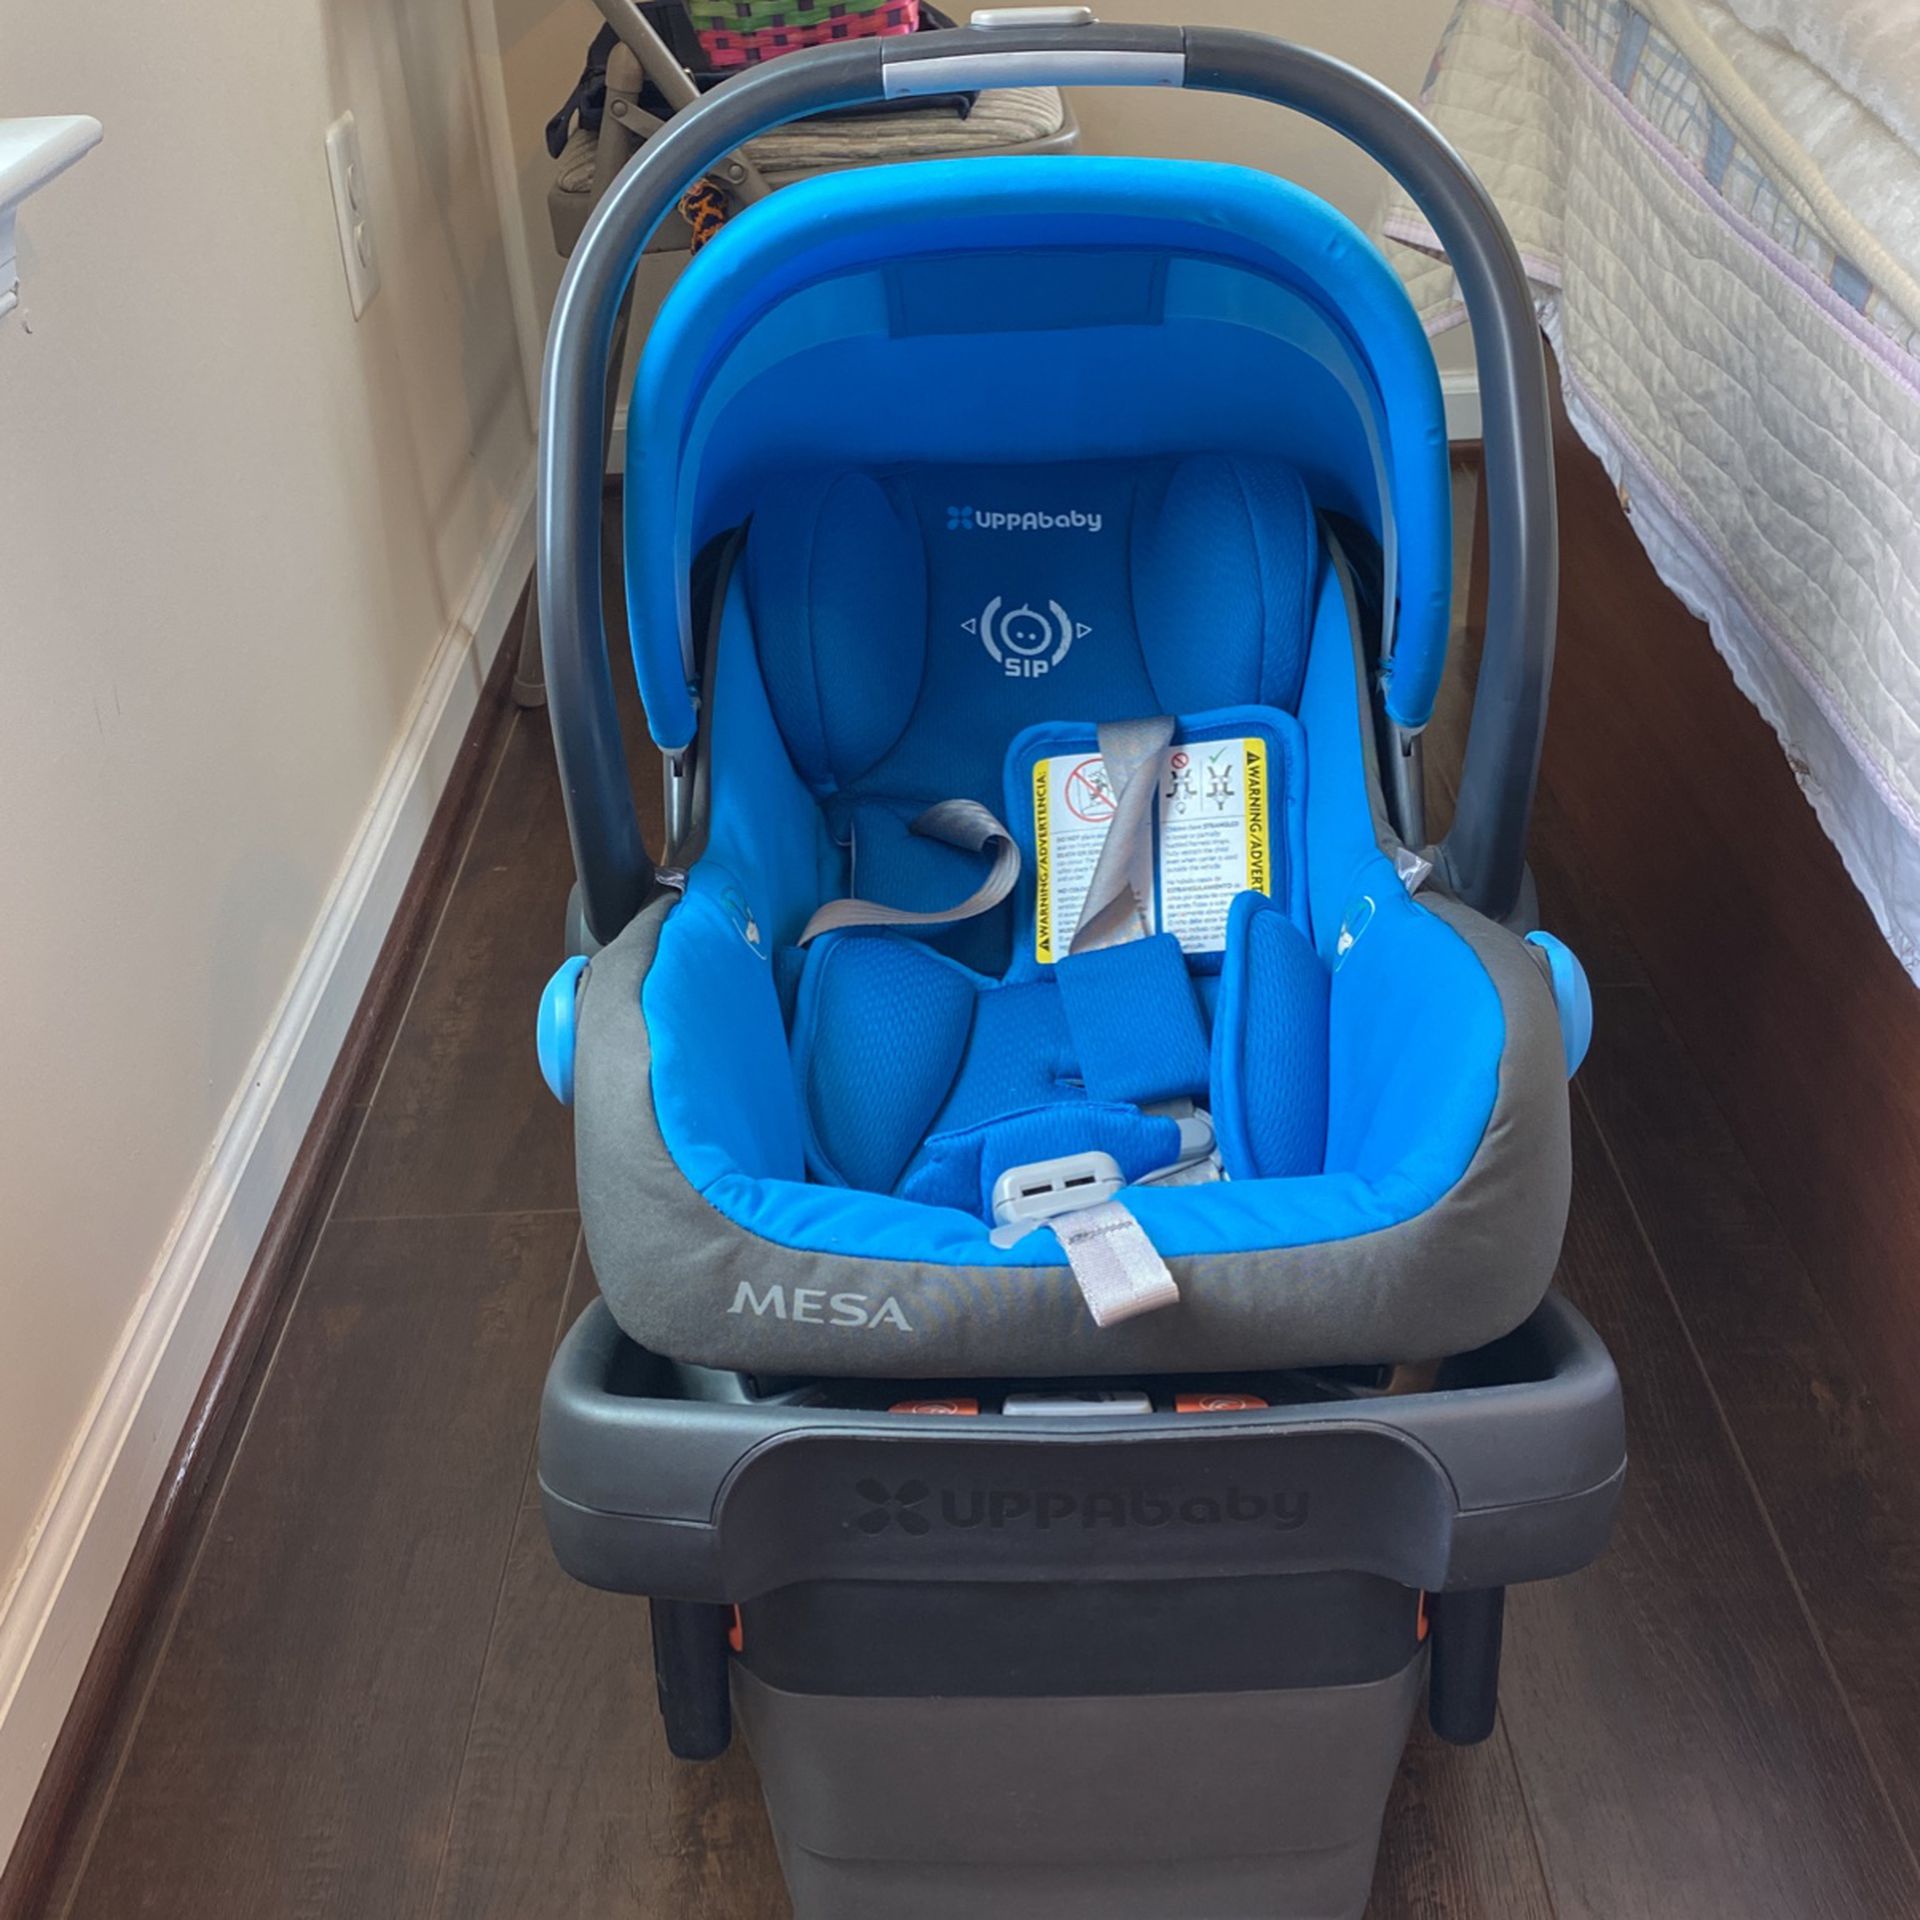 Uppababy mesa Car Seat For Infants